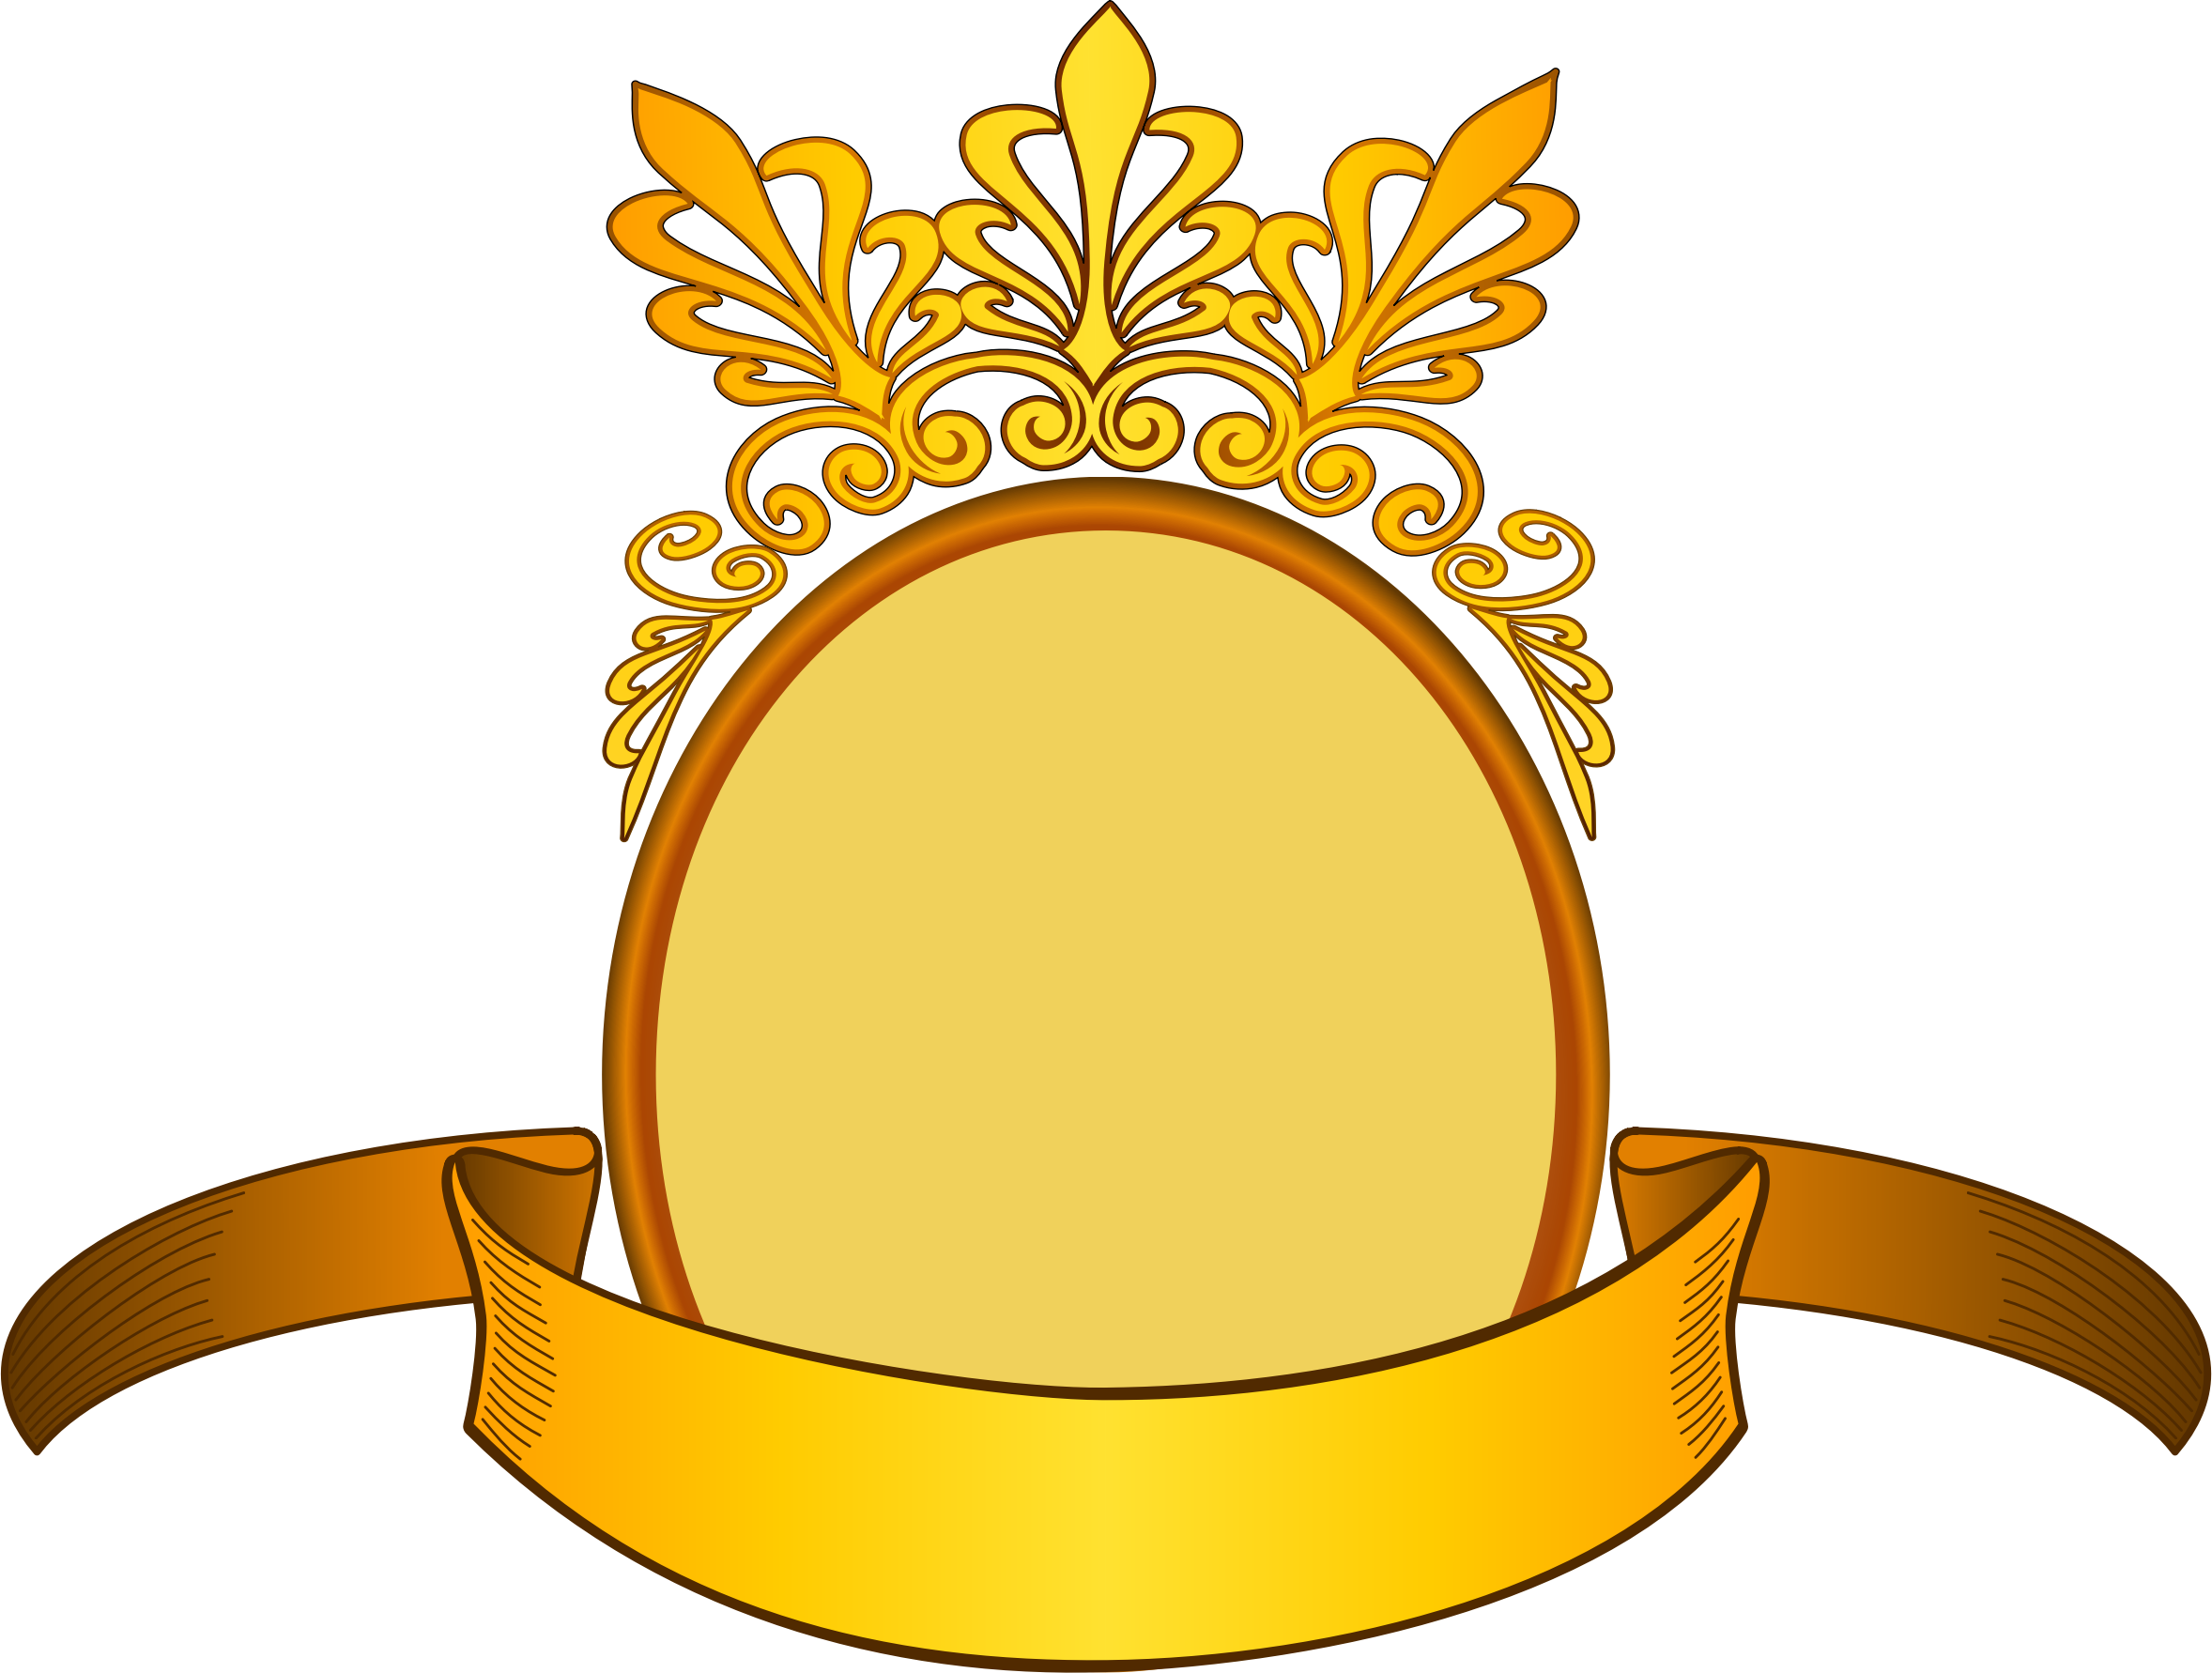 Coat of Arms PNG icon